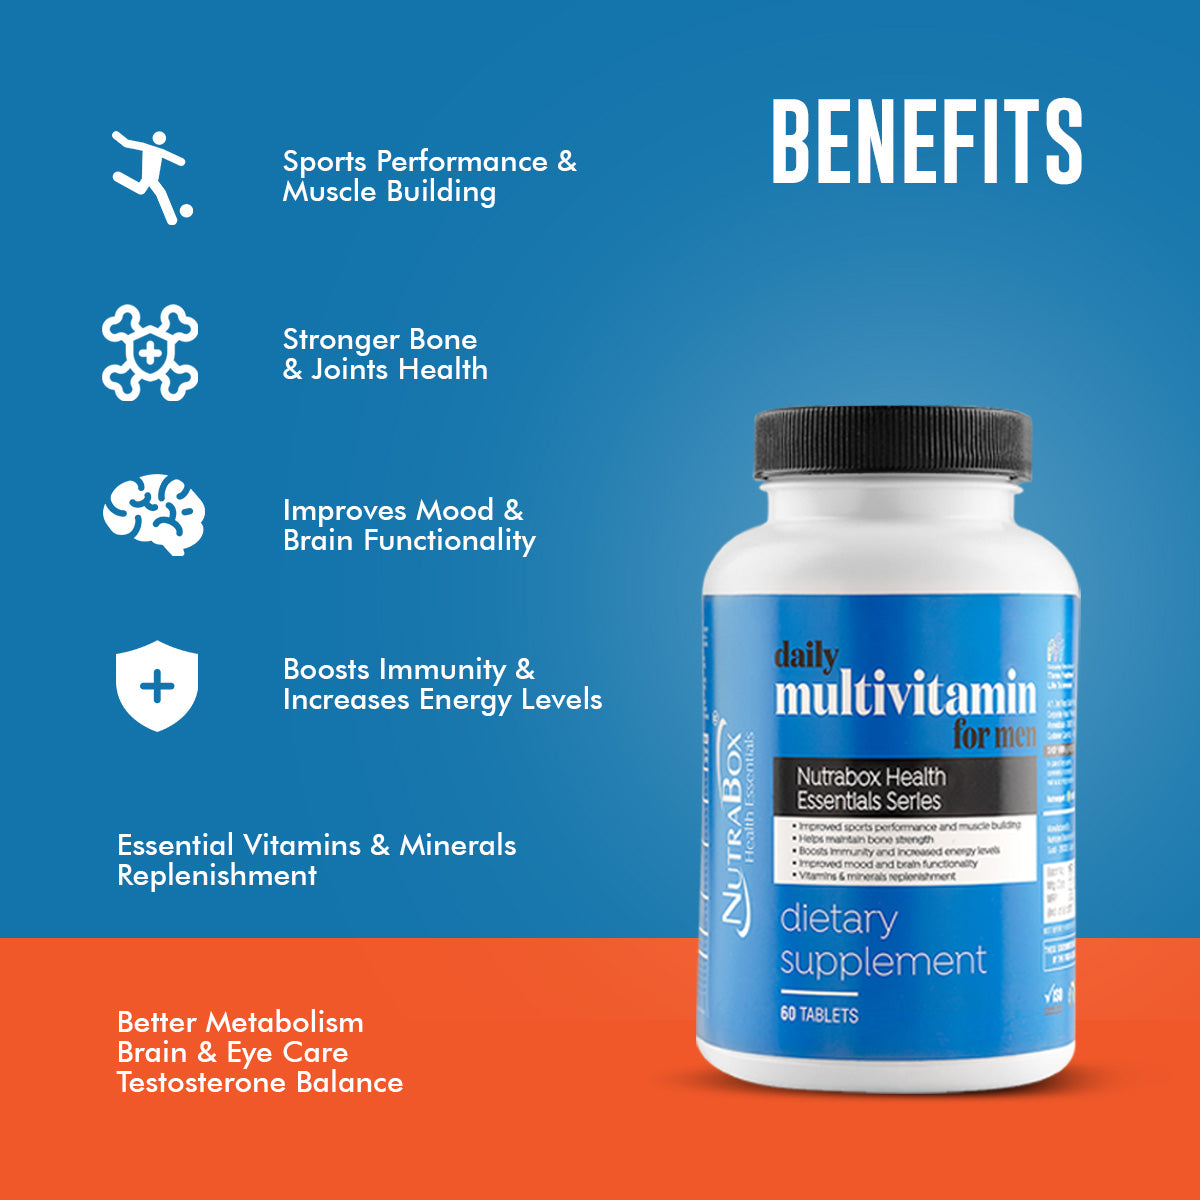 Benefits of Daily Multivitamins for Men